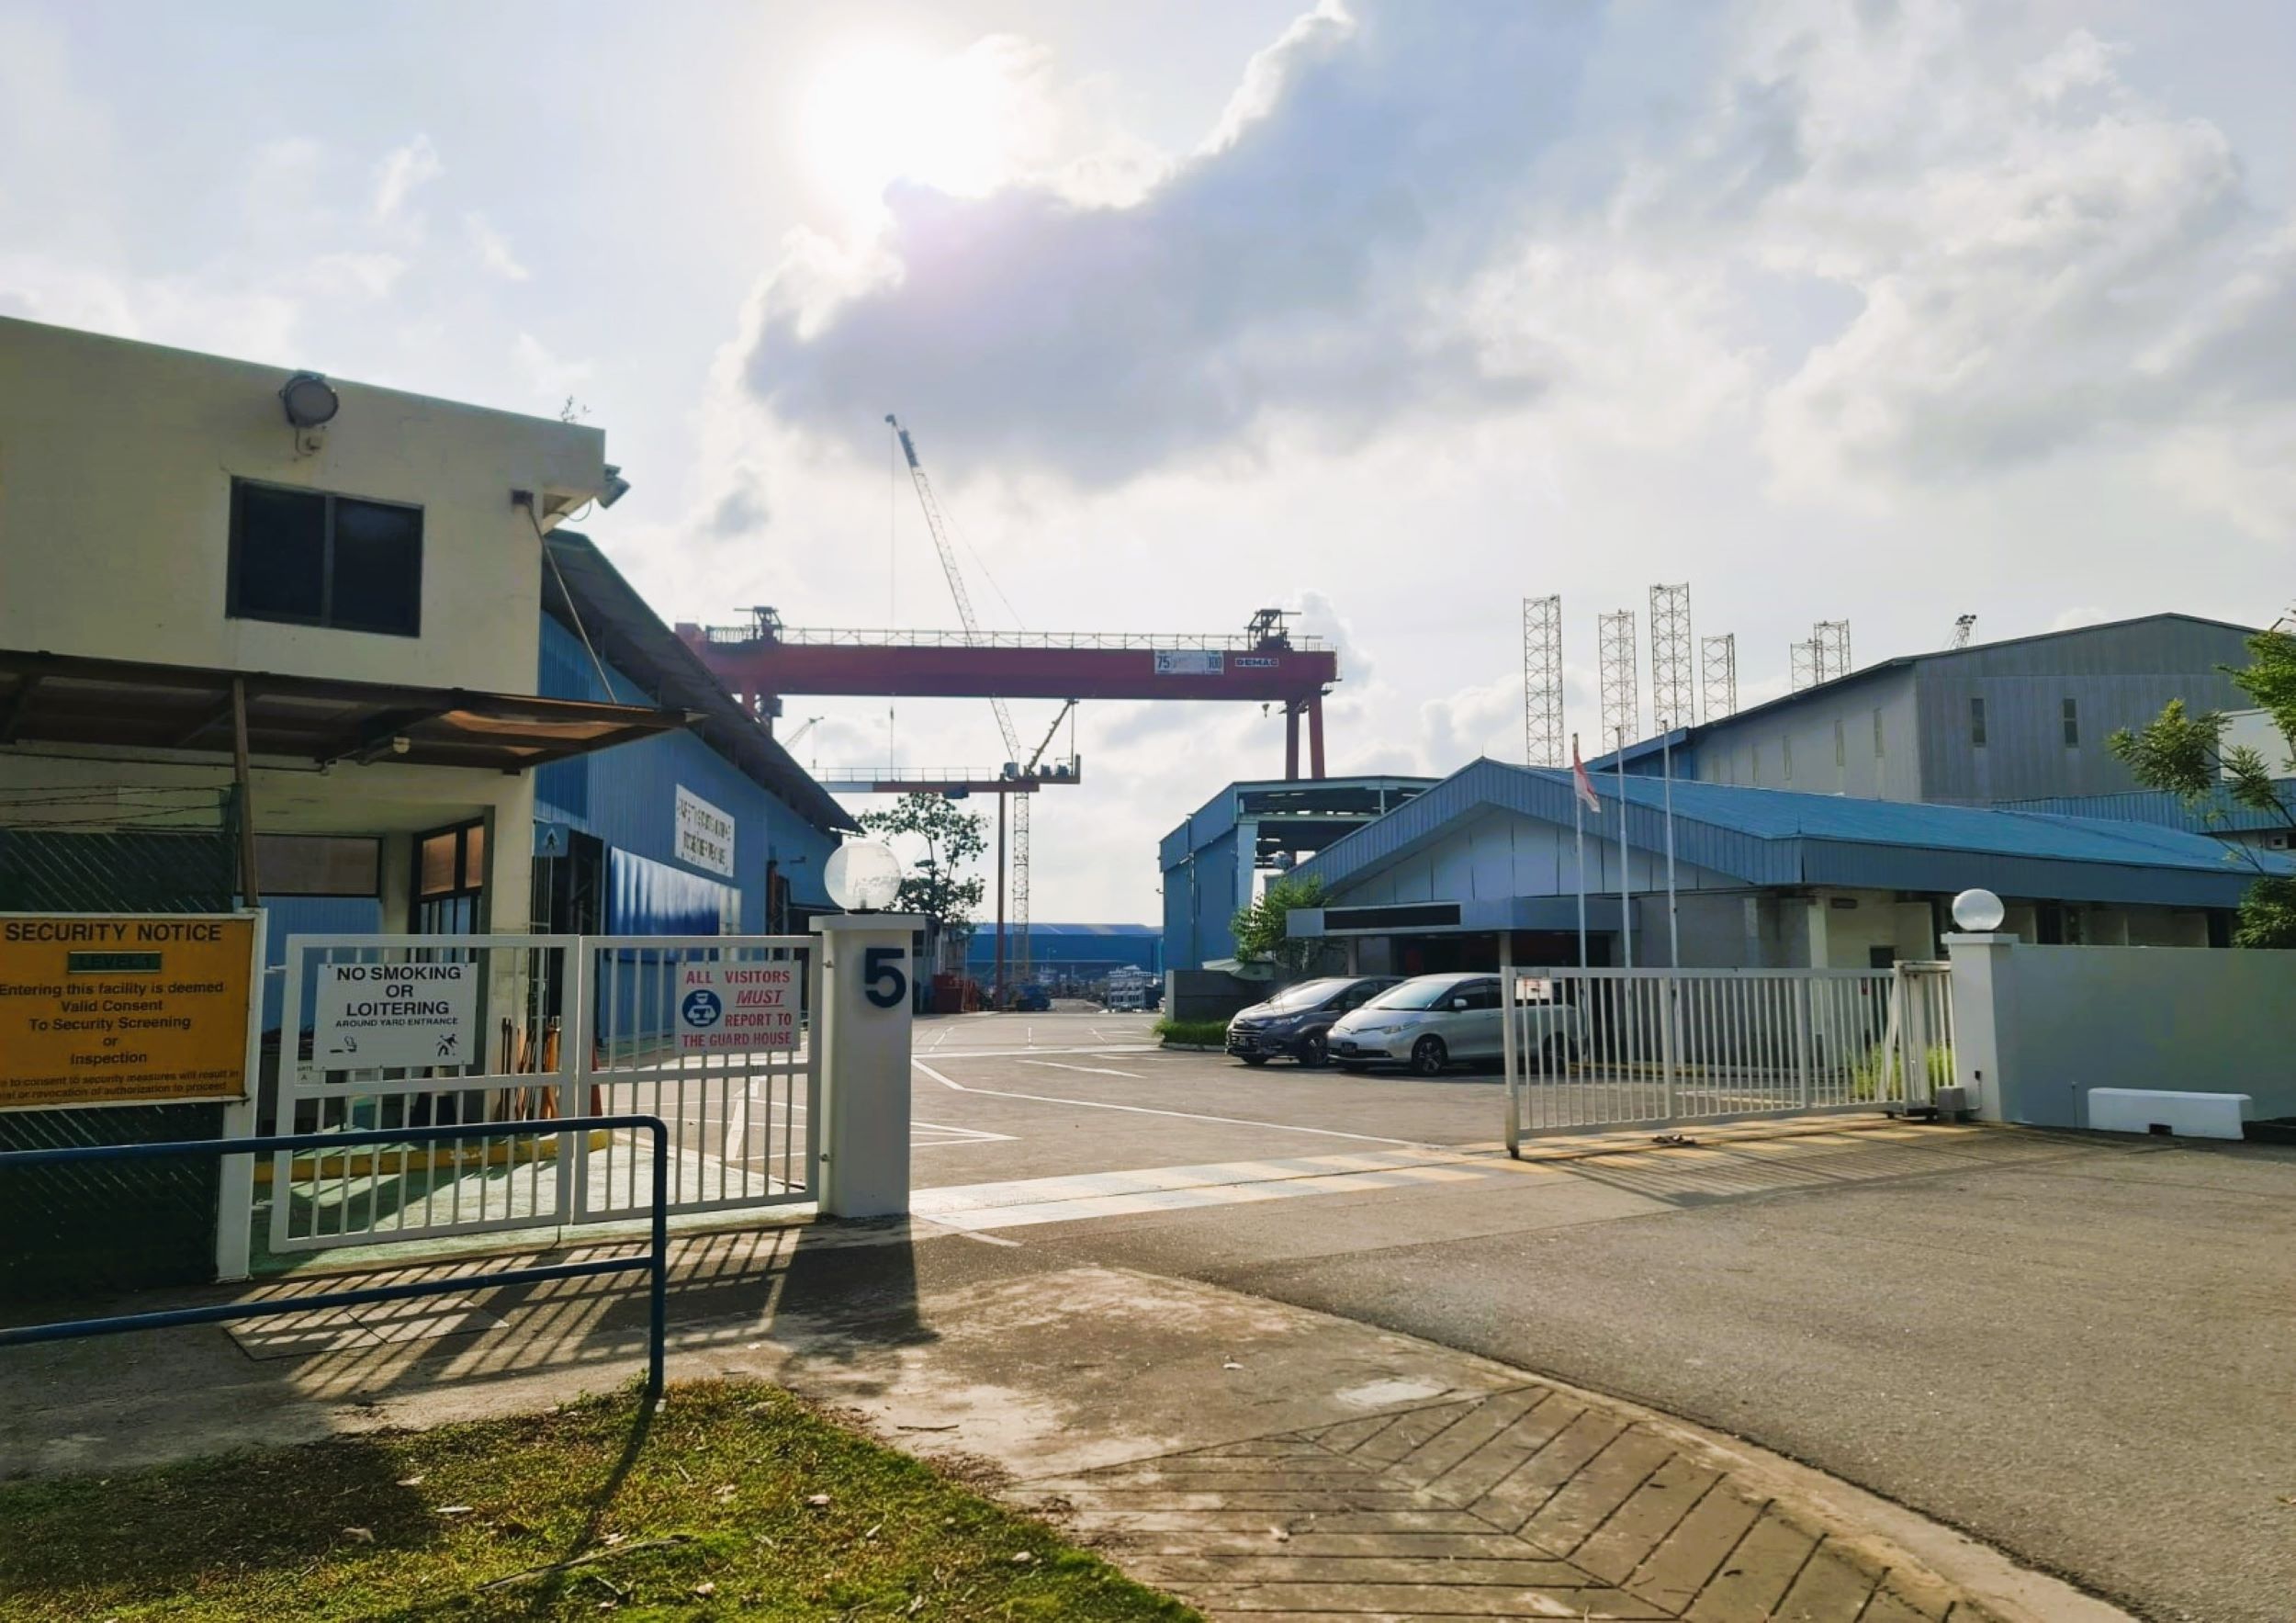 Strategic Marine Completes Acquisition of New Shipyard in Singapore, Ramps Up Shipbuilding Capacity to Meet Growing Demand